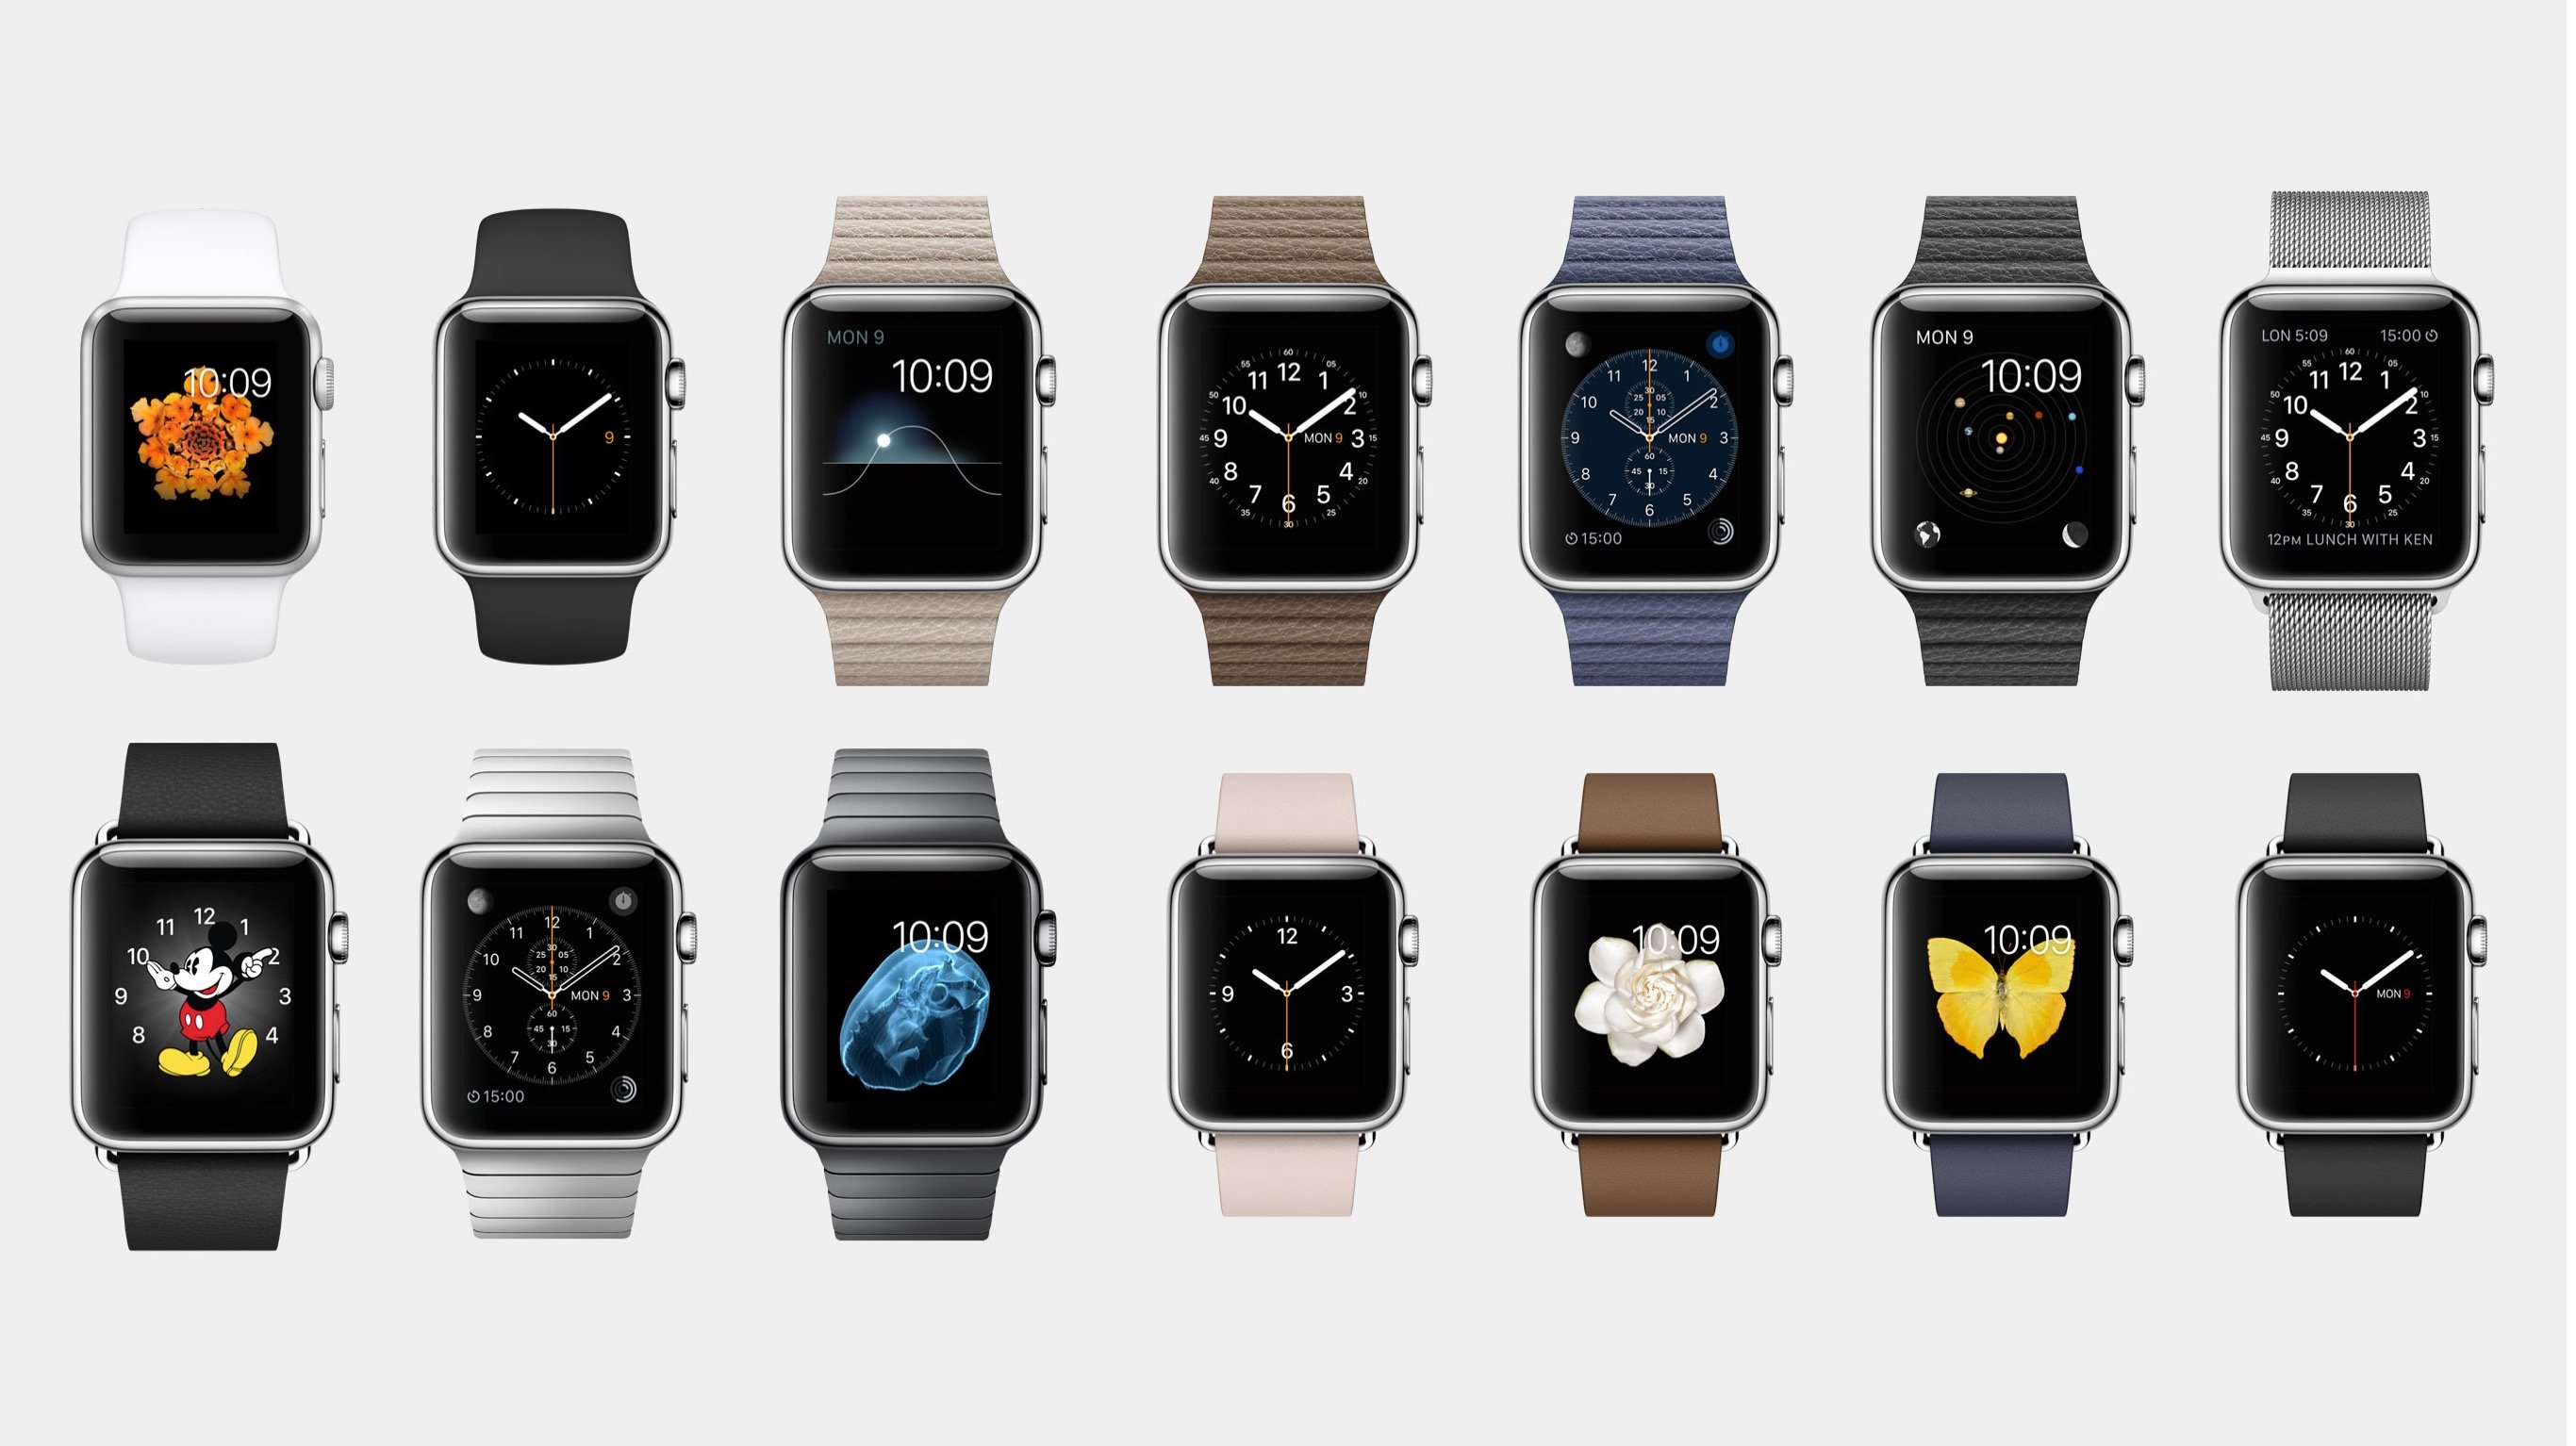 Apple Watch prices vary based on band and finish.